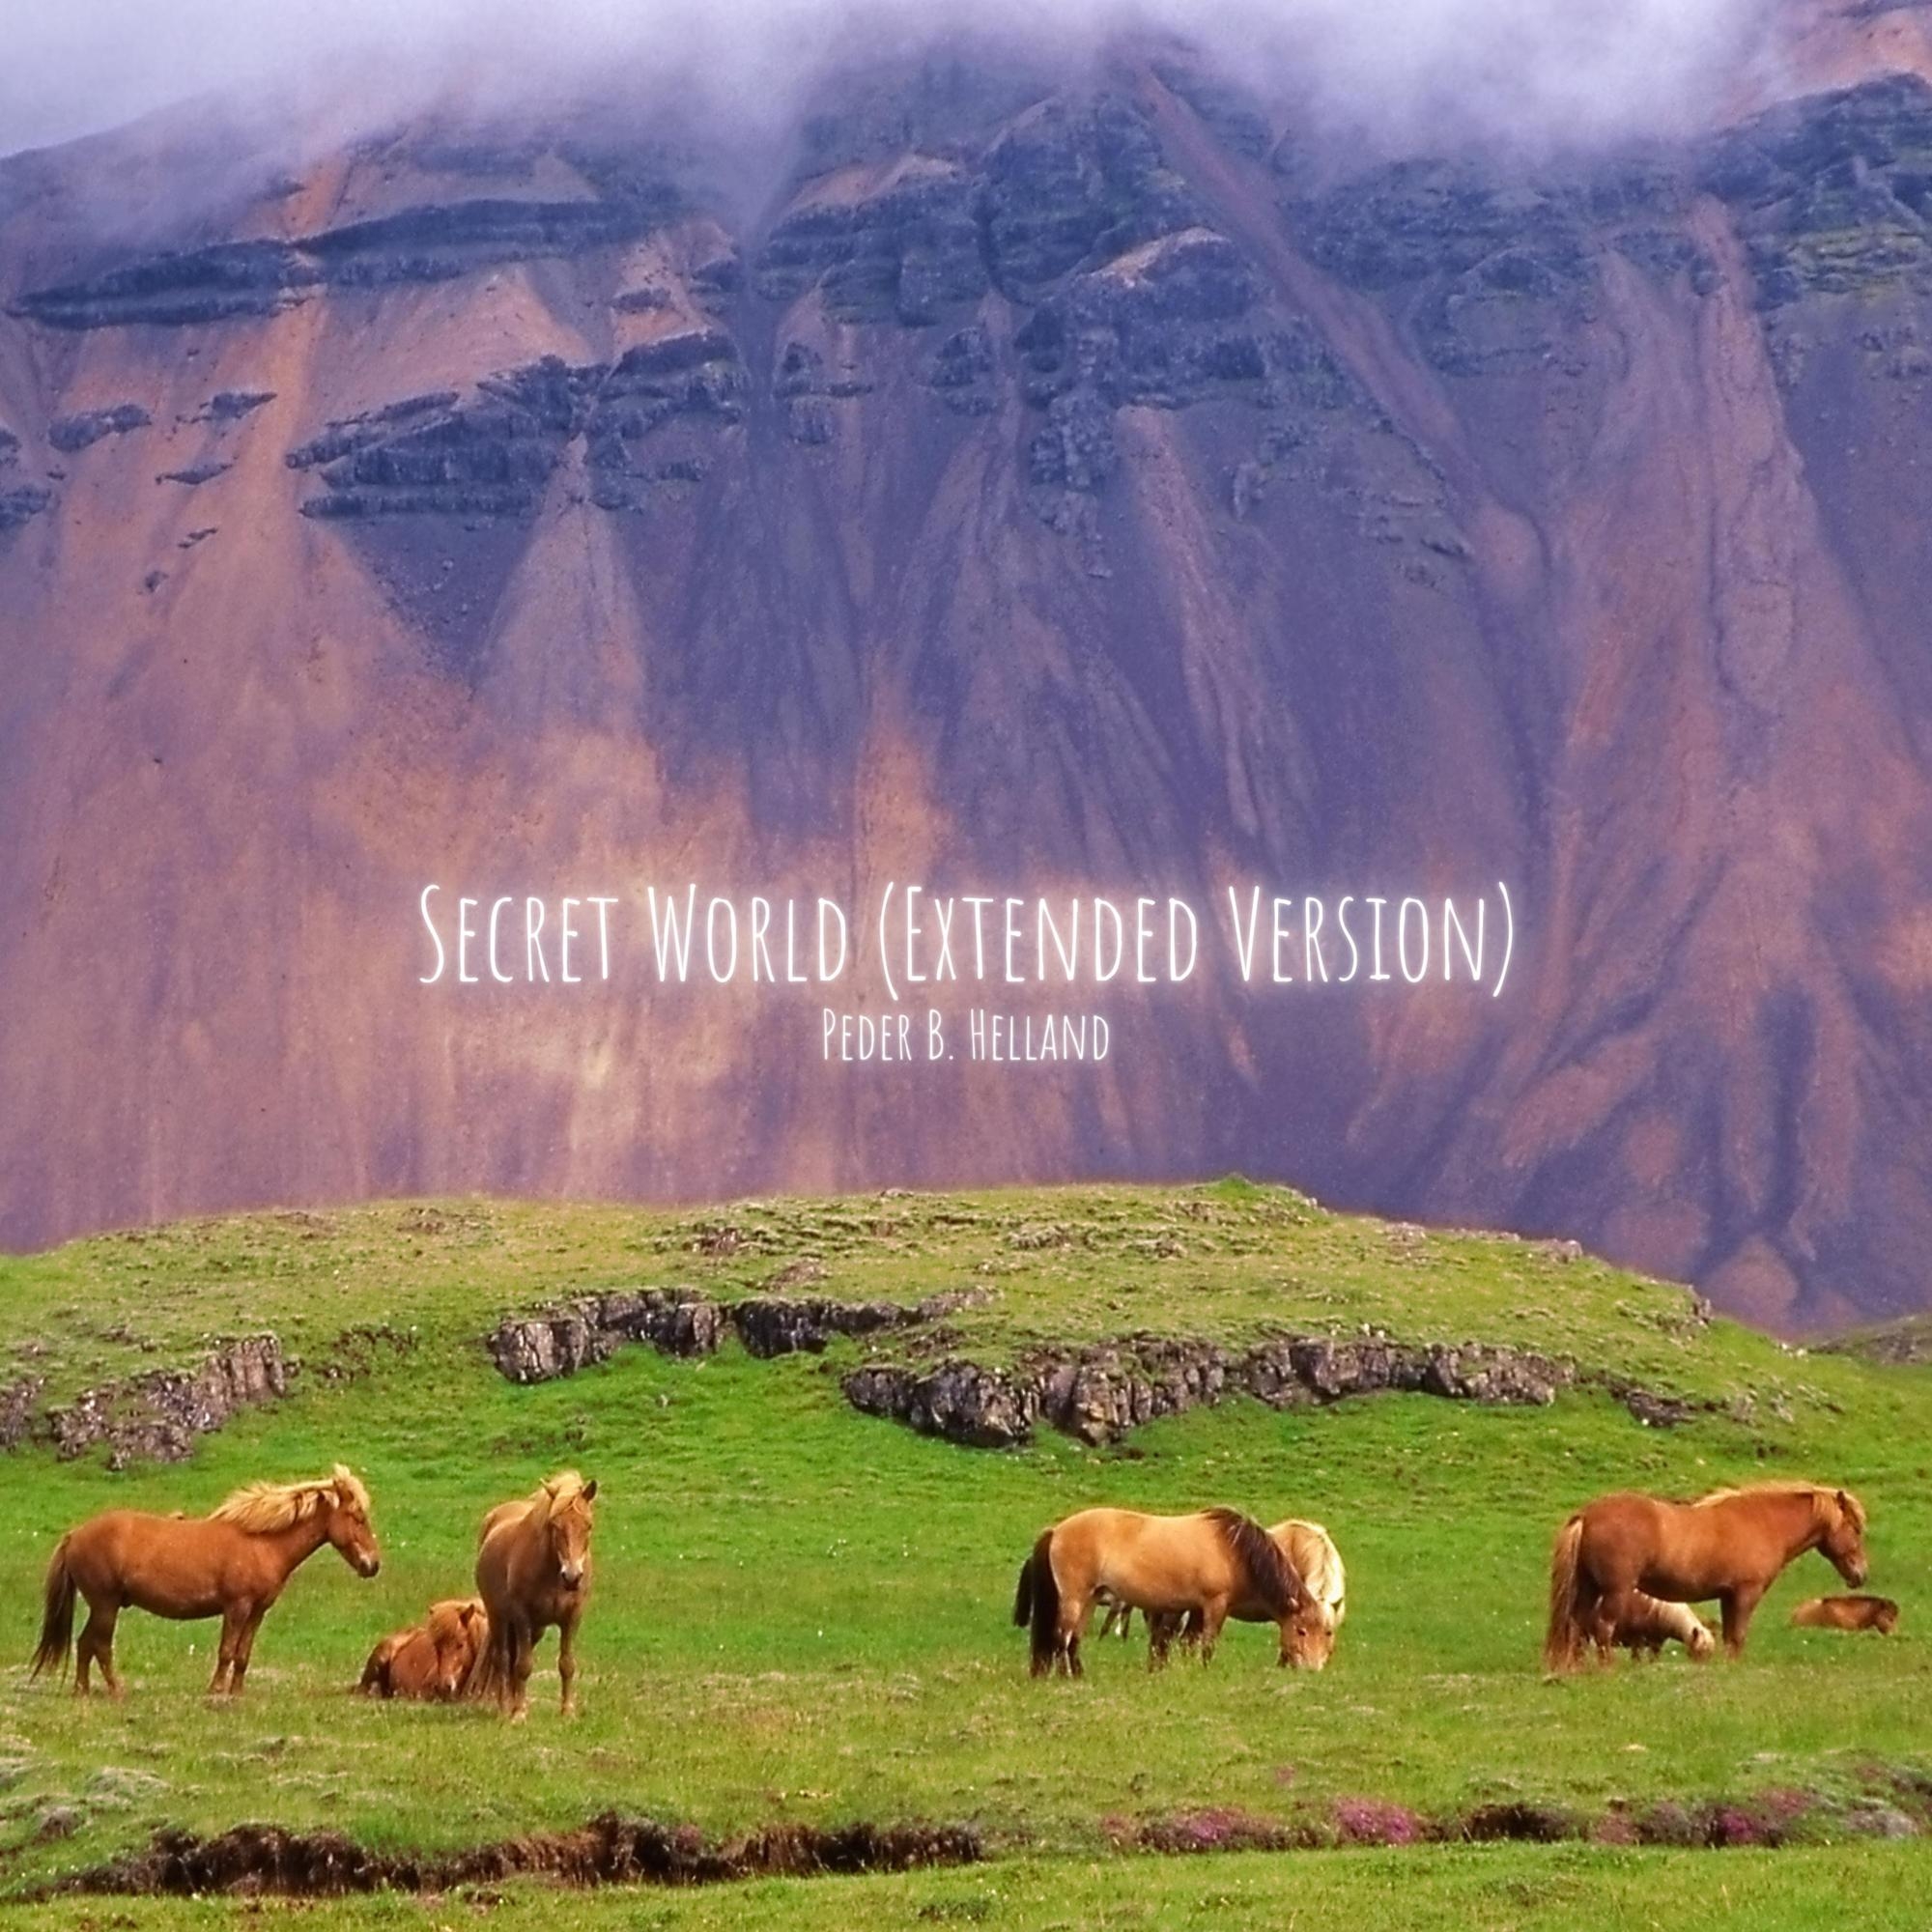 Cover art for the single Secret World (Extended Version) by Peder B. Helland